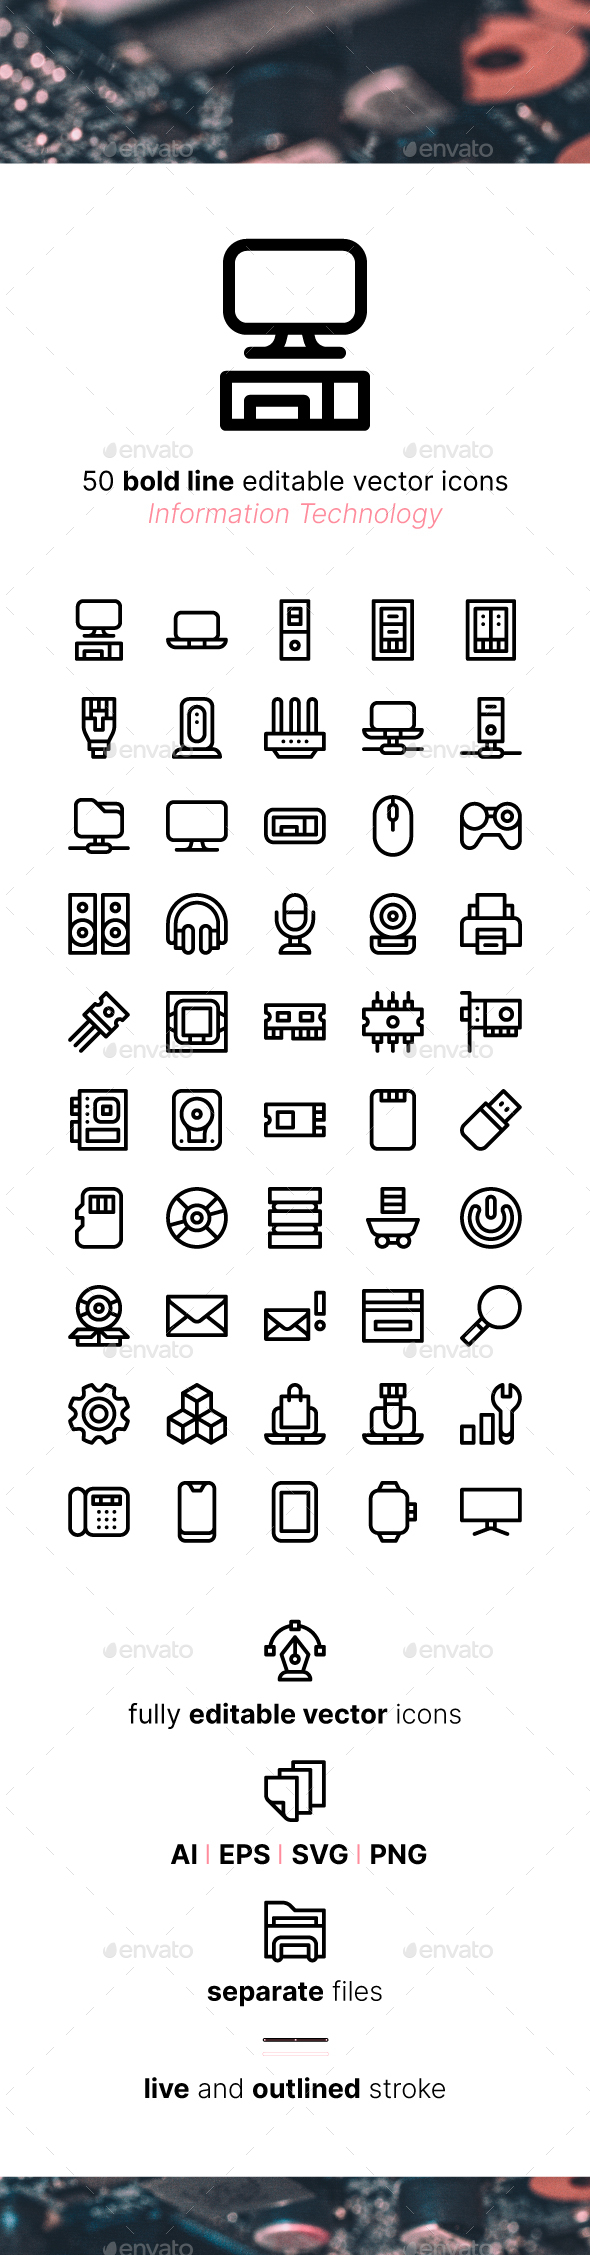 50 Information Technology Icons